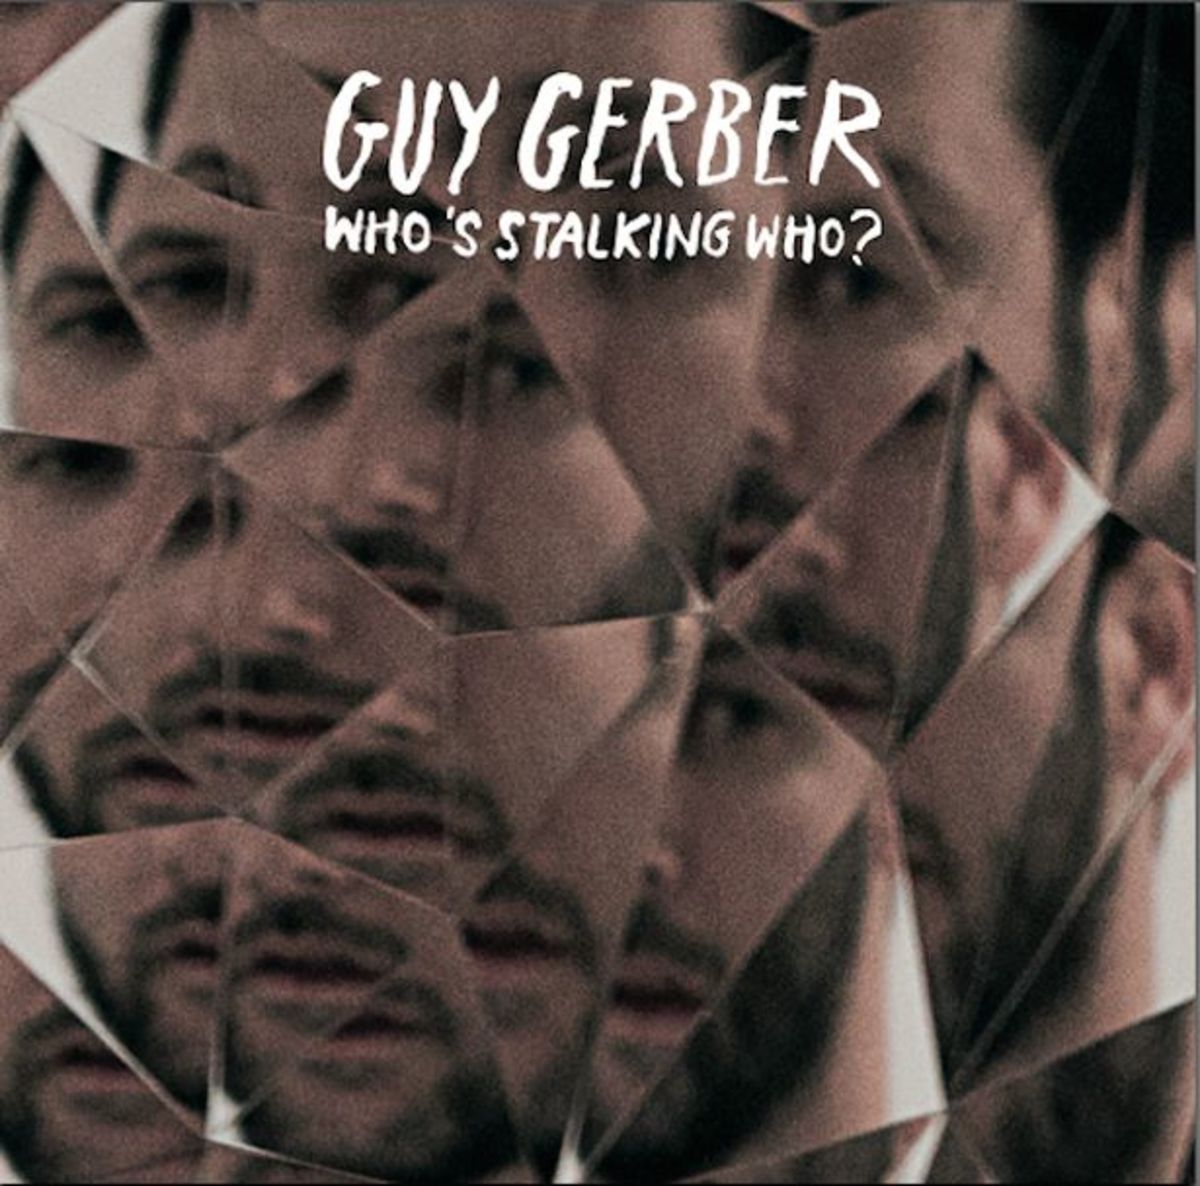 EDM Download: Guy Gerber Shares Who’s Stalking Who On His SoundCloud